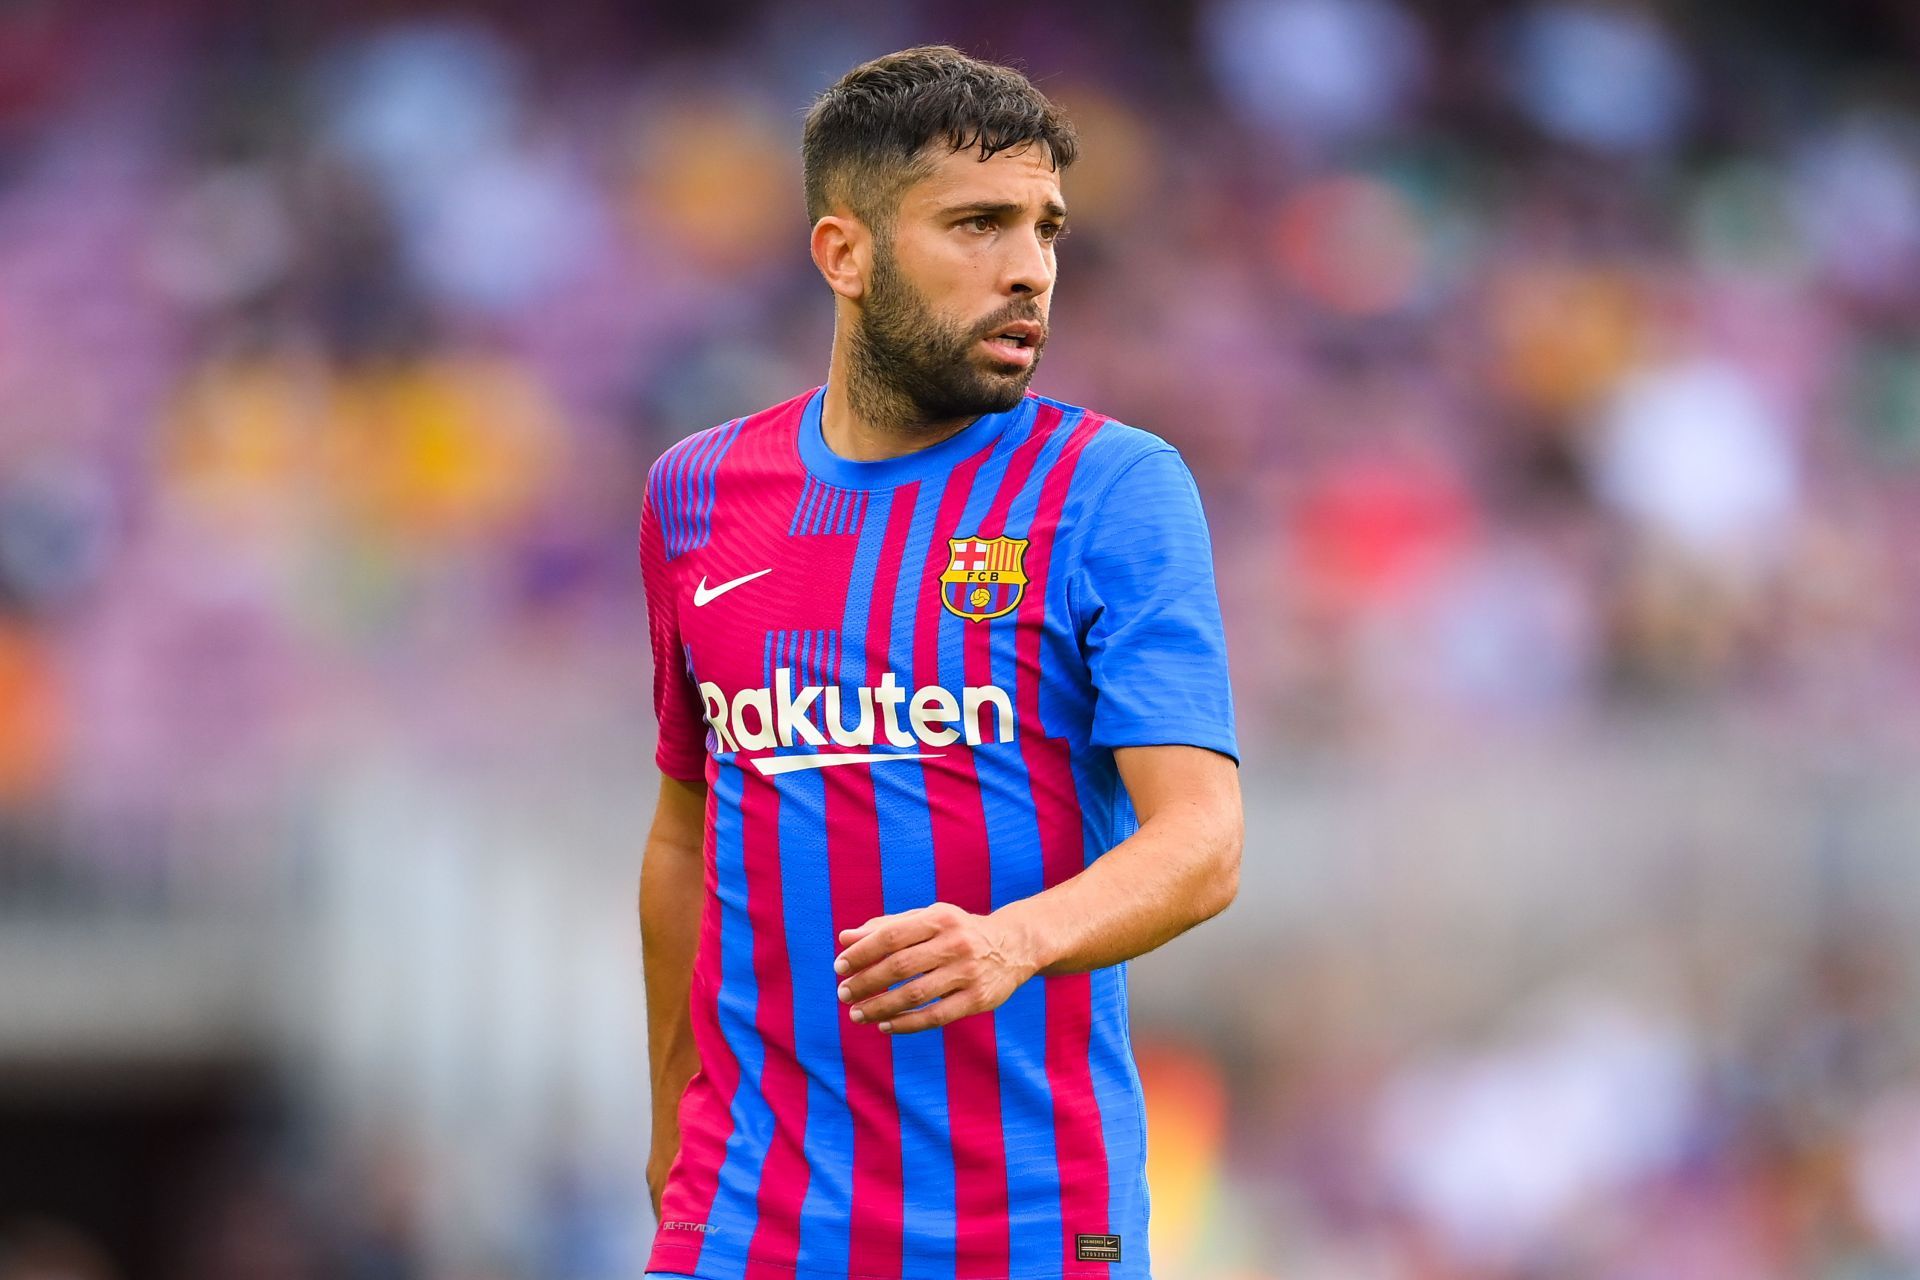 Alba is in his 10th season with Barcelona